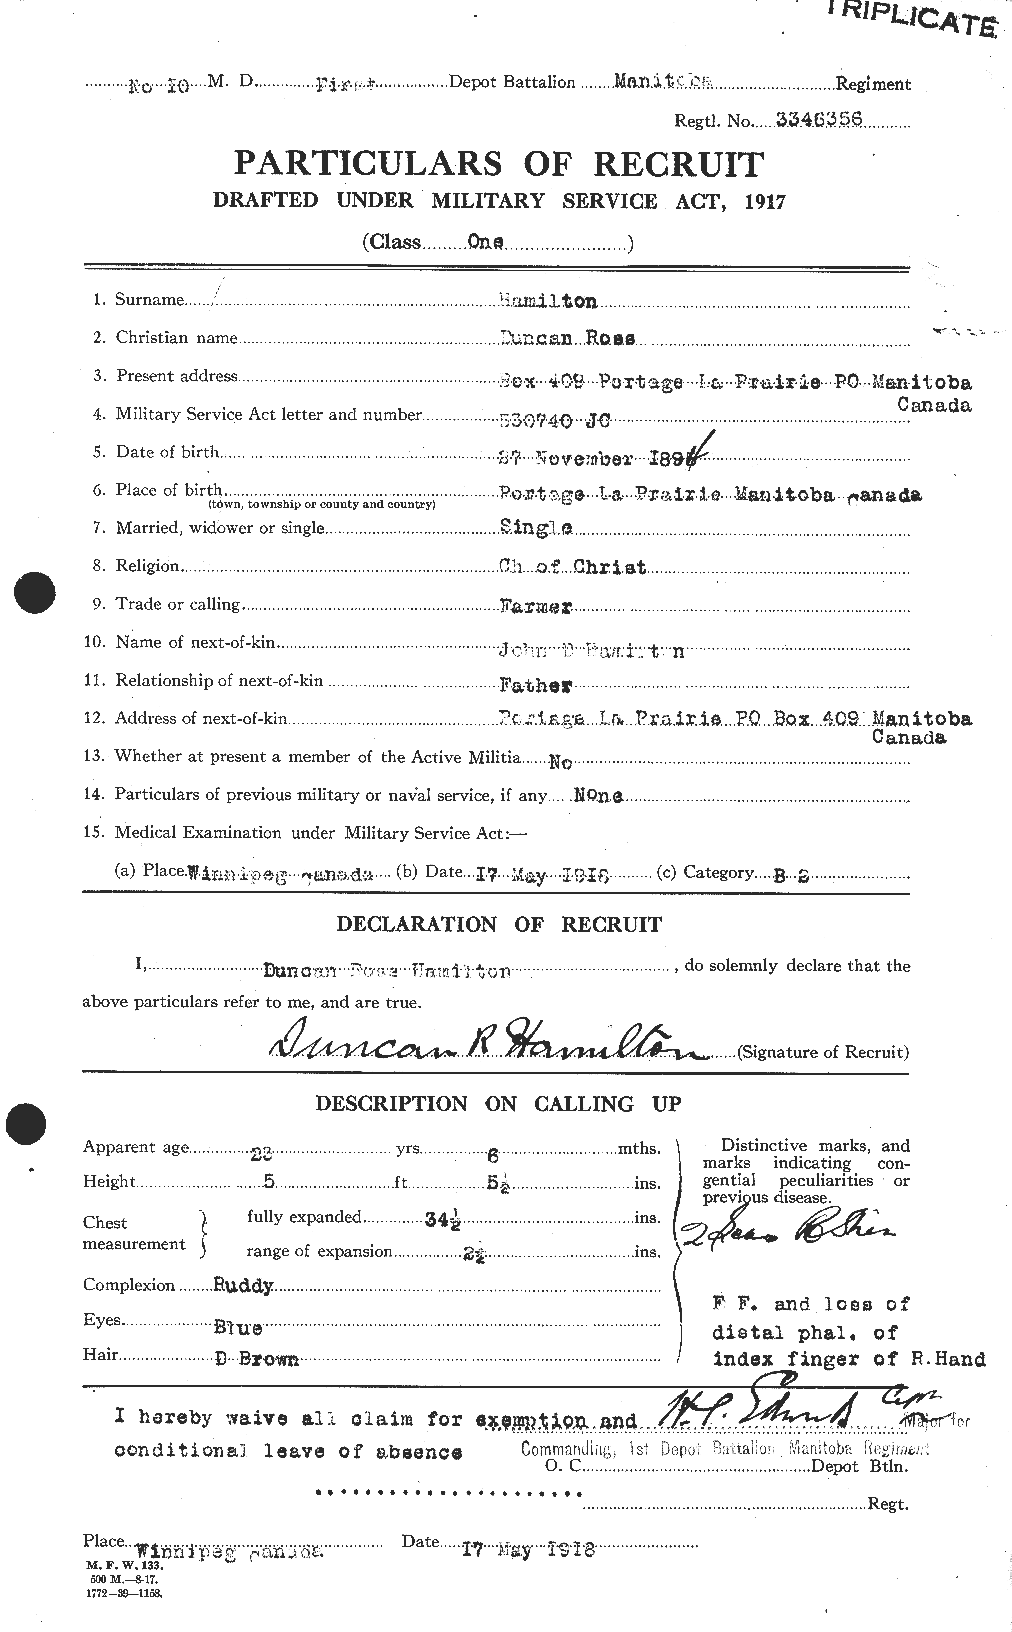 Personnel Records of the First World War - CEF 375367a